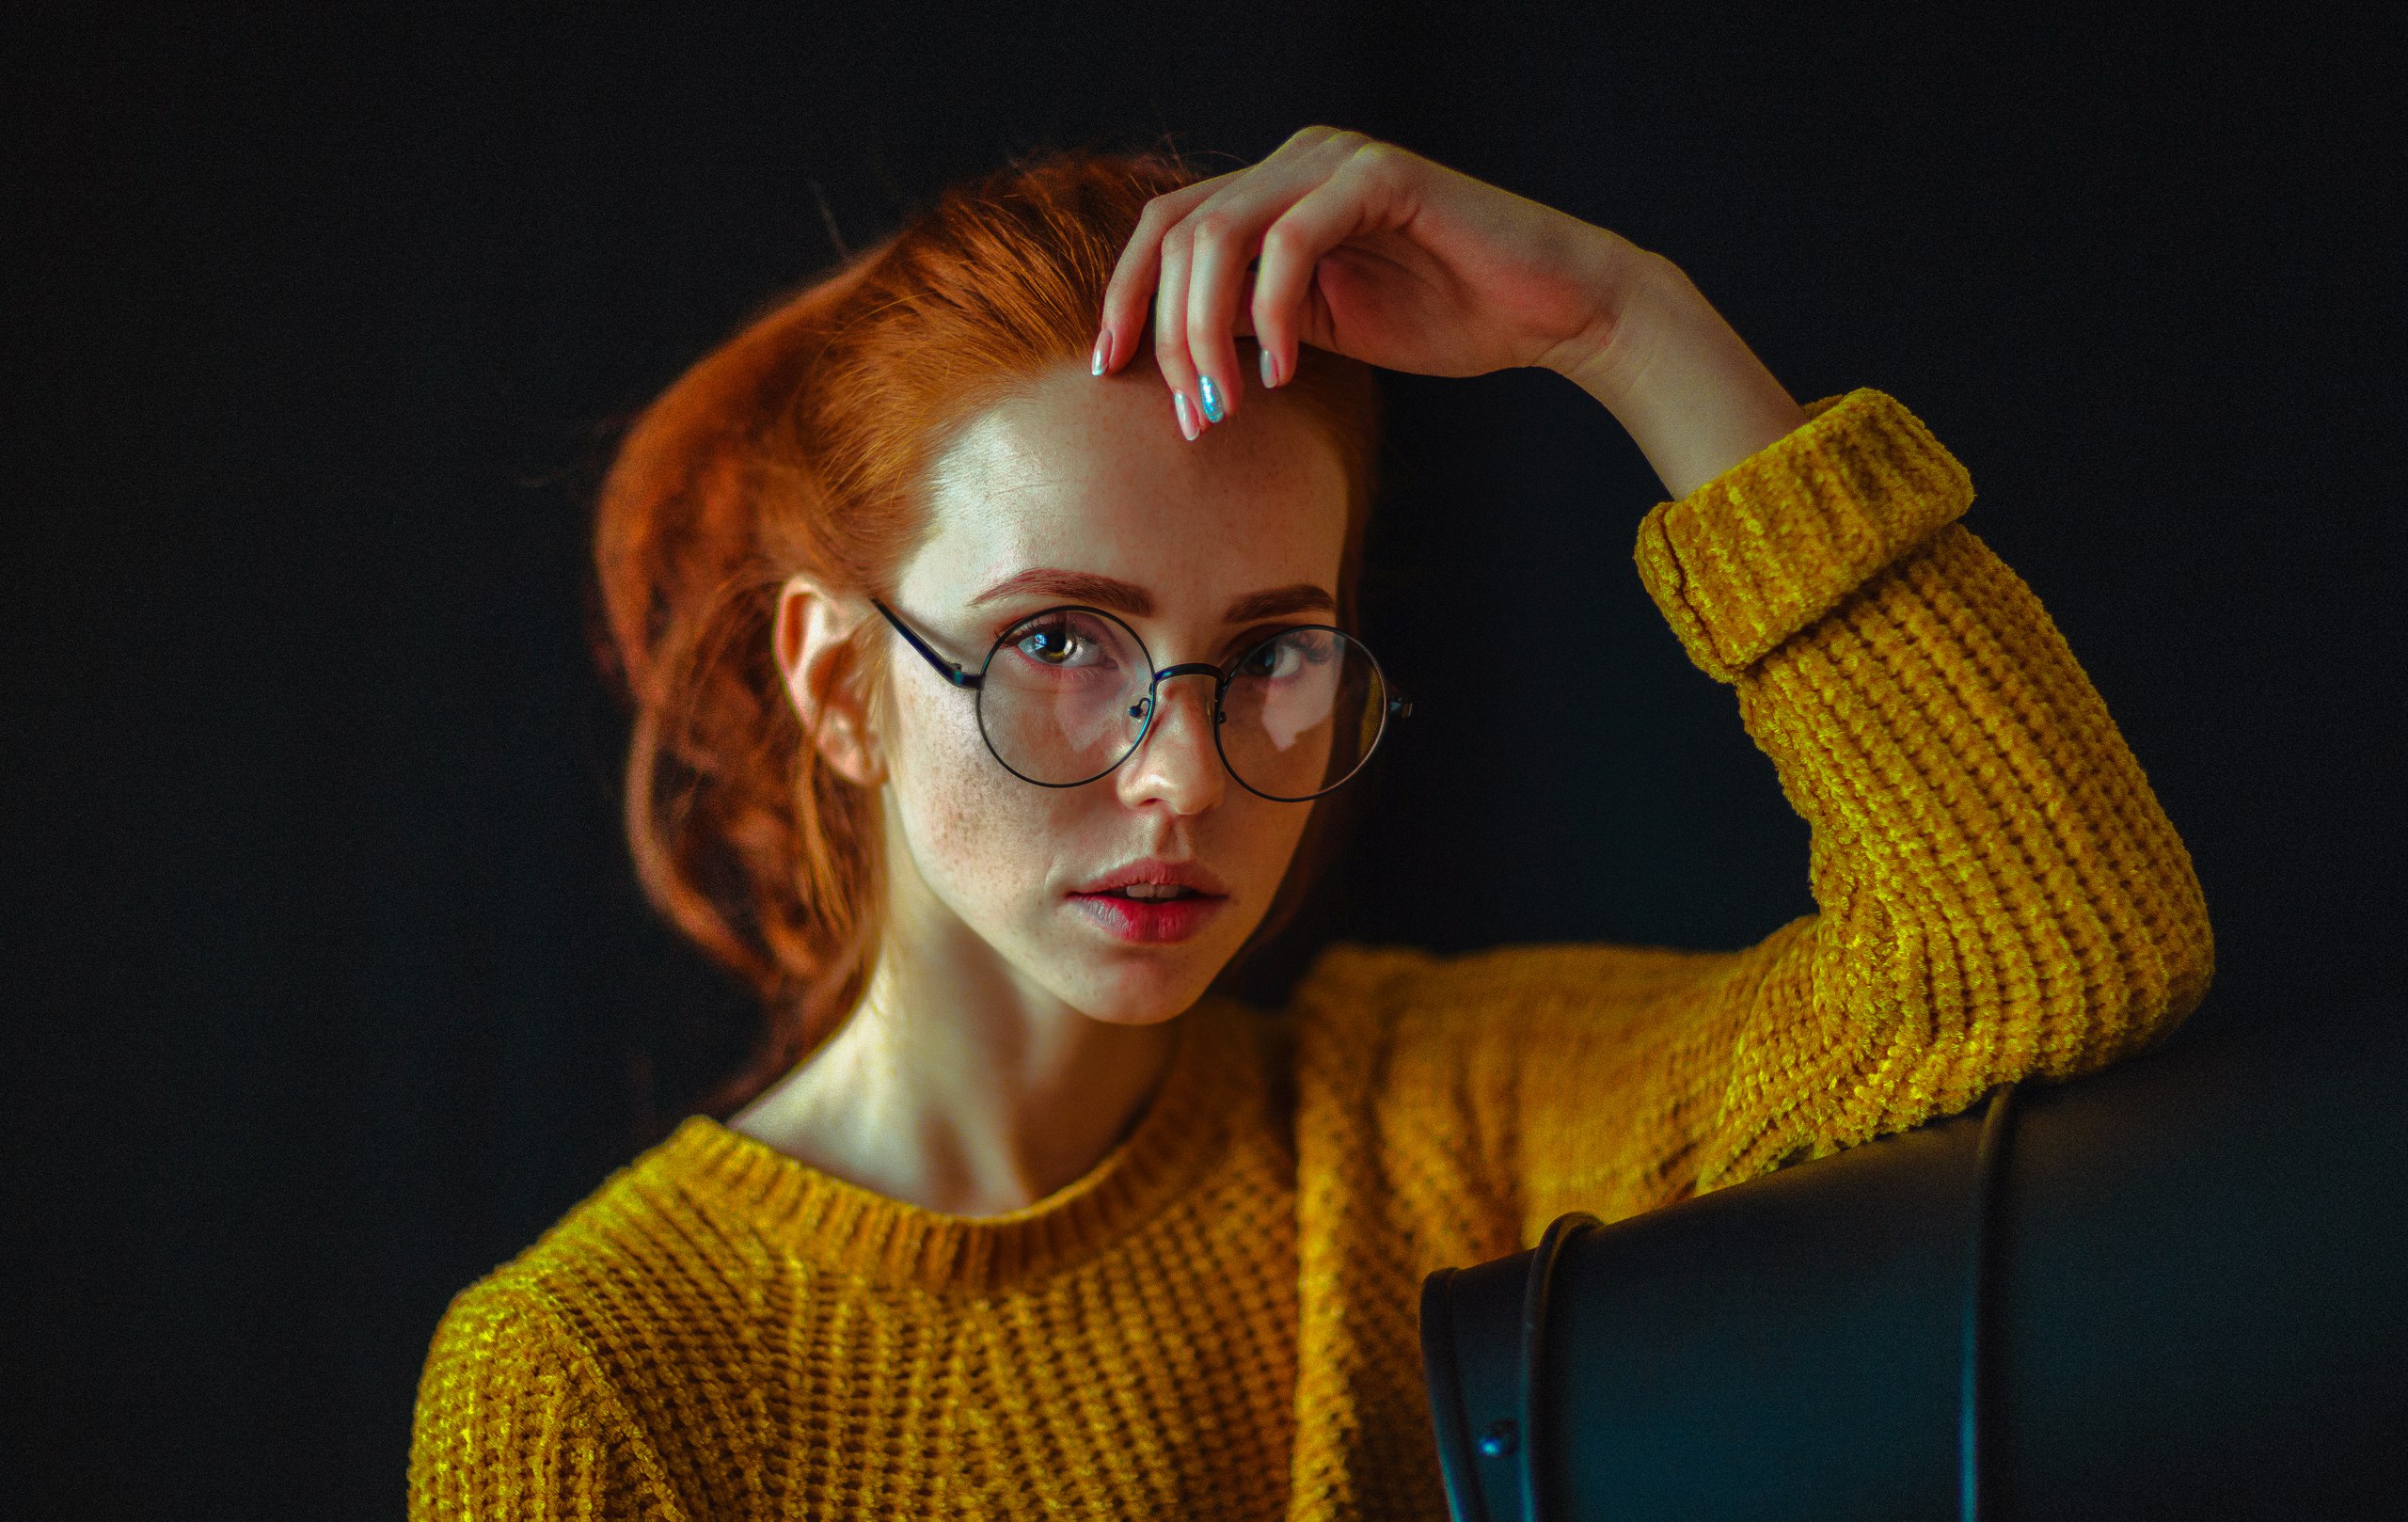 Portrait Women Model Women With Glasses Looking At Viewer Redhead Sweater Women Indoors Painted Nail 2560x1618